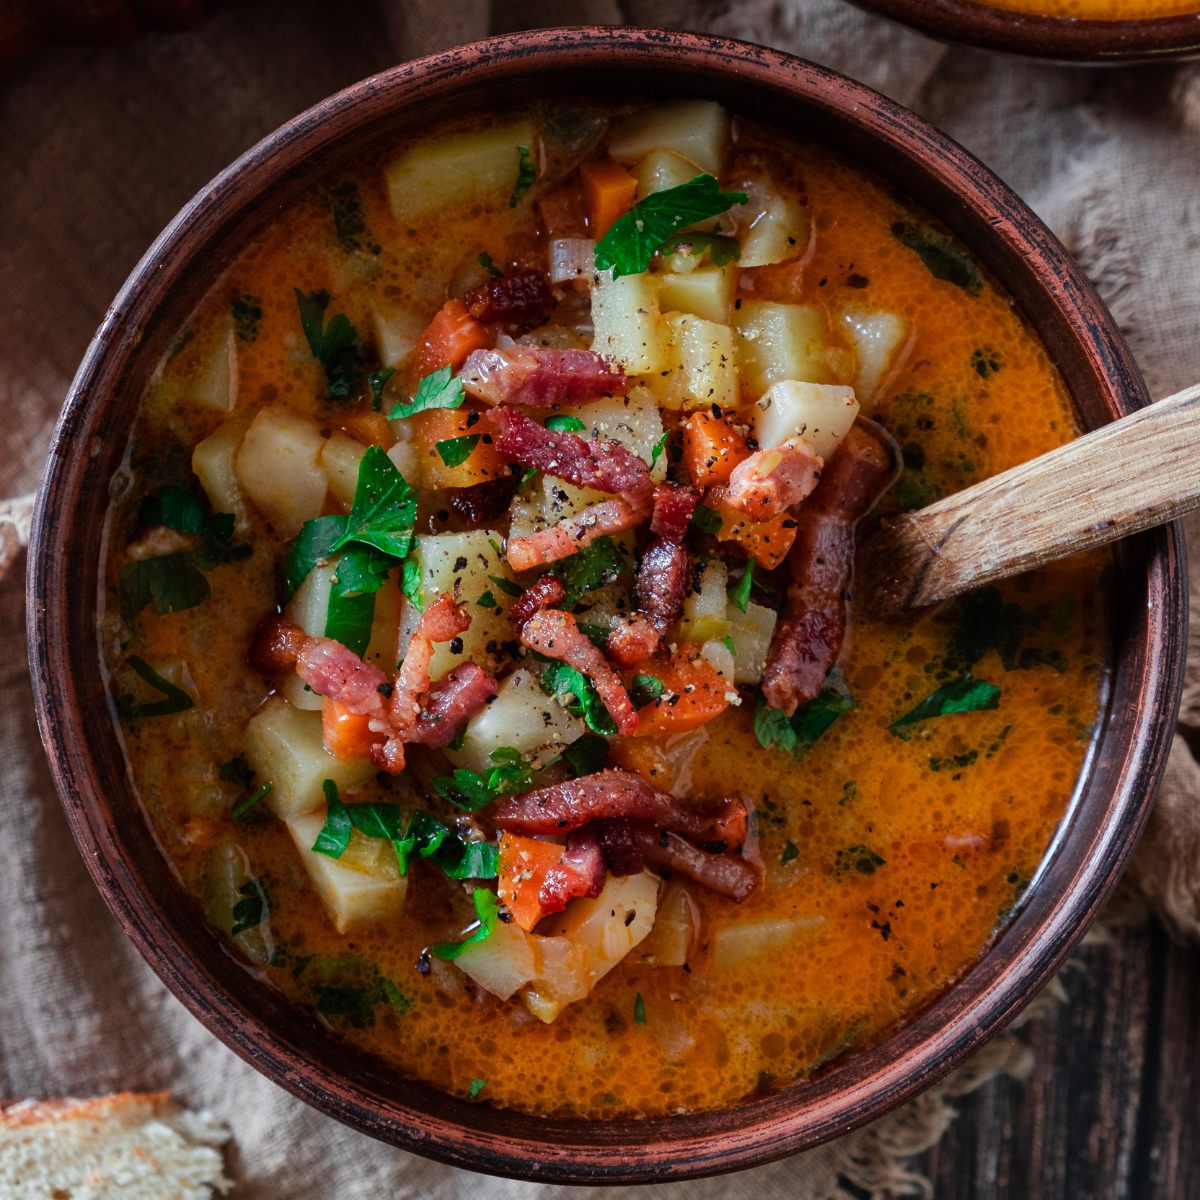 A bowl full of chunky, creamy German potato soup with lots of veggies and bacon.